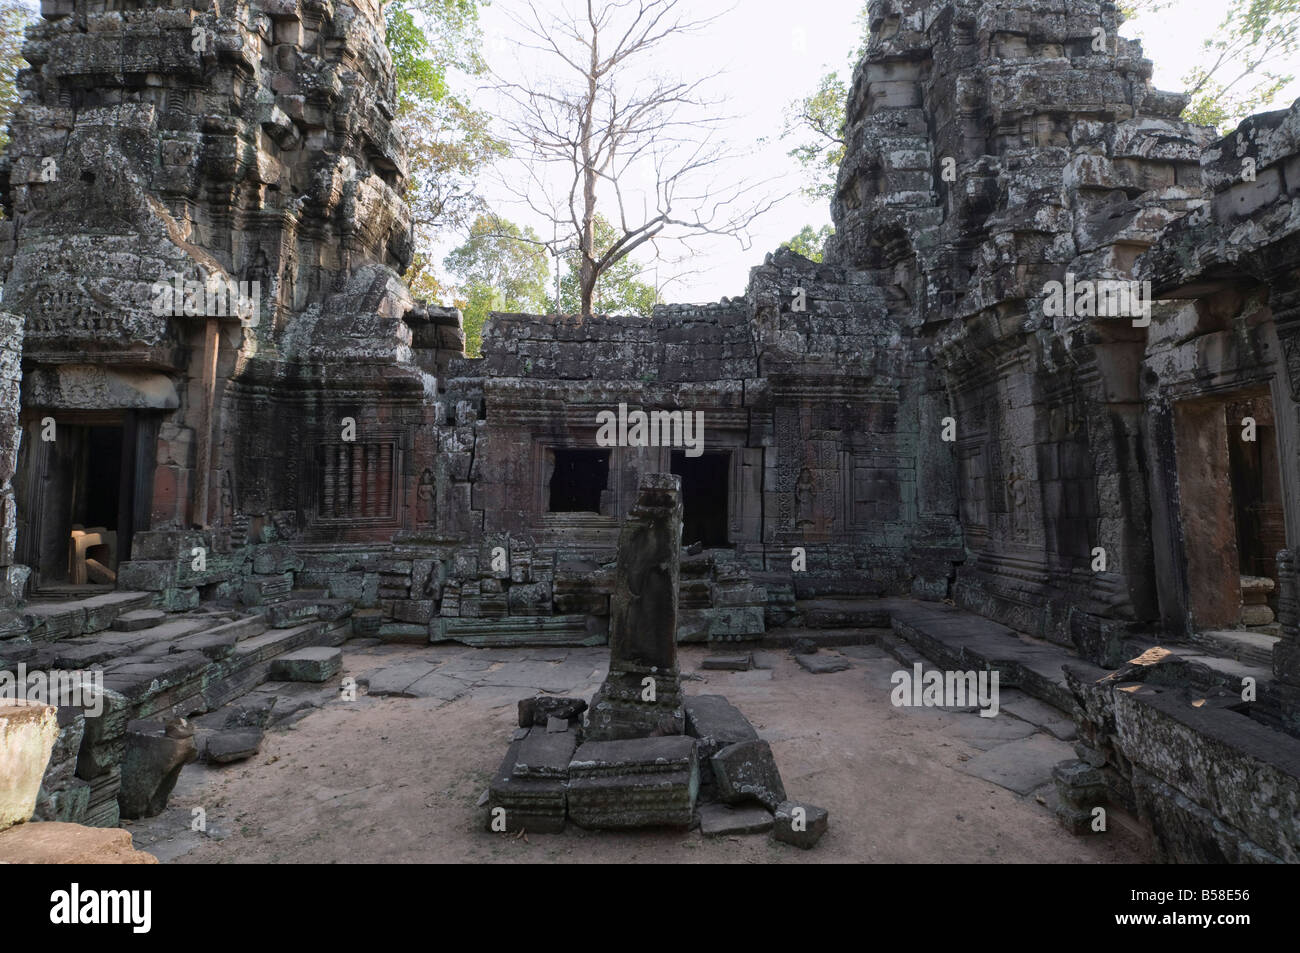 Banteay Kdei temple, Angkor Thom, Angkor, UNESCO World Heritage Site, Siem Reap, Cambodia, Indochina, Southeast Asia Stock Photo